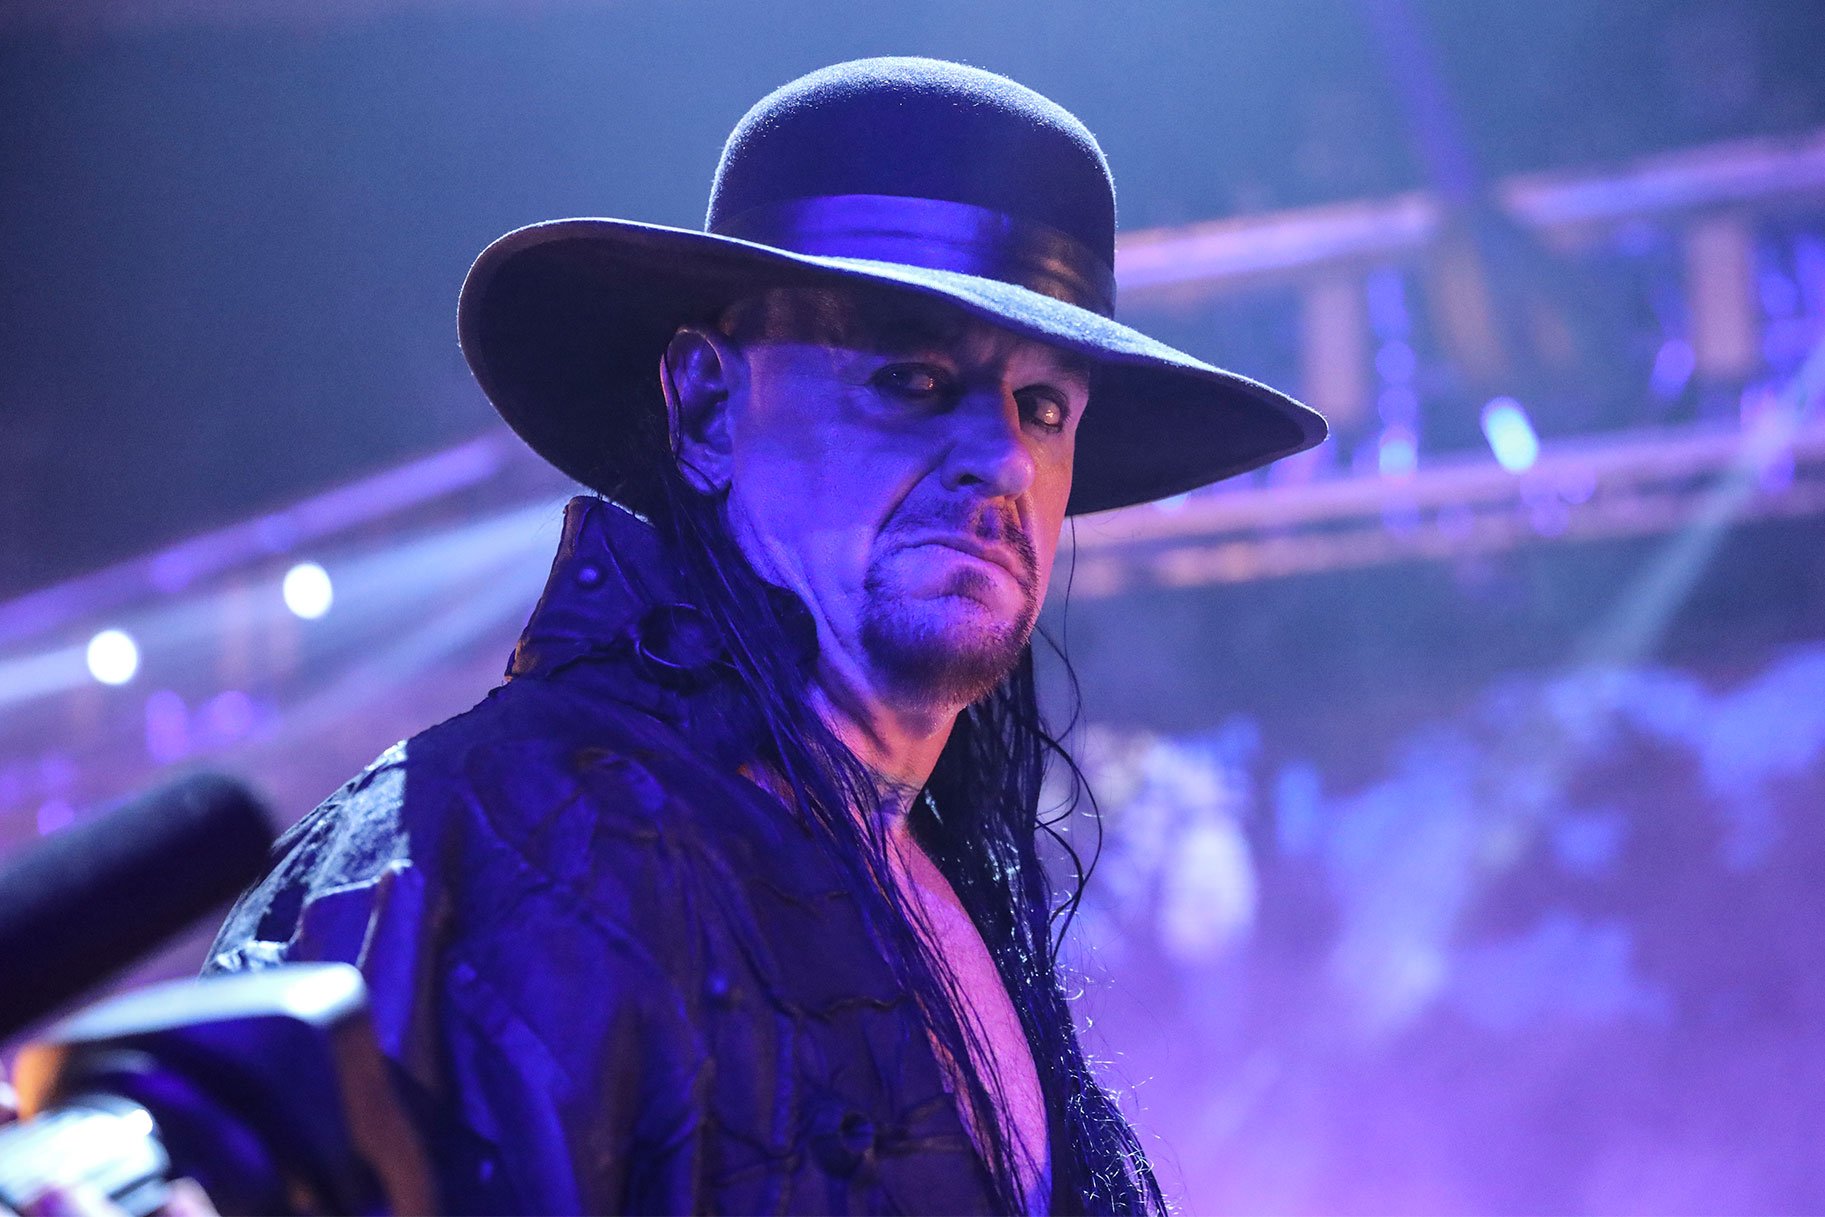 The Undertaker’s perspective on Cody Rhodes: ‘His baby face character will have an extraordinary journey, but his villain role is likely to have an even greater impact’.